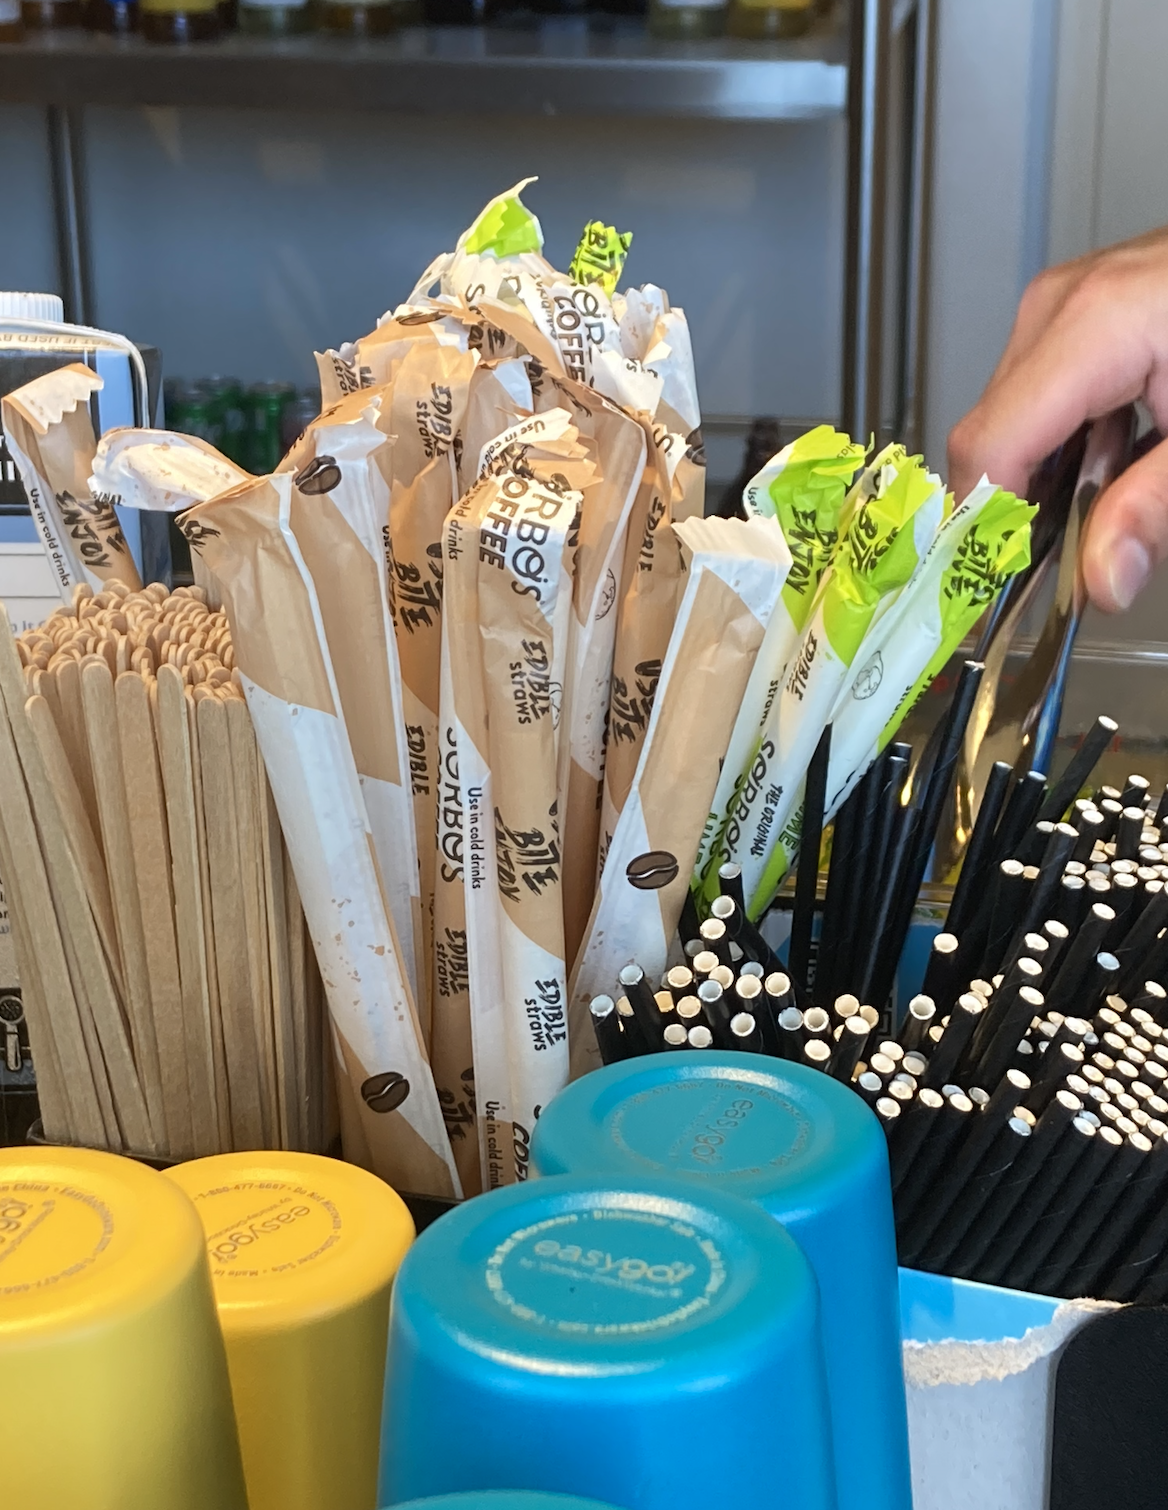 A hand reaches for black straws among a variety of unwrapped and wrapped straws, wooden stir sticks, and upside-down plastic cups in a coffee shop setting